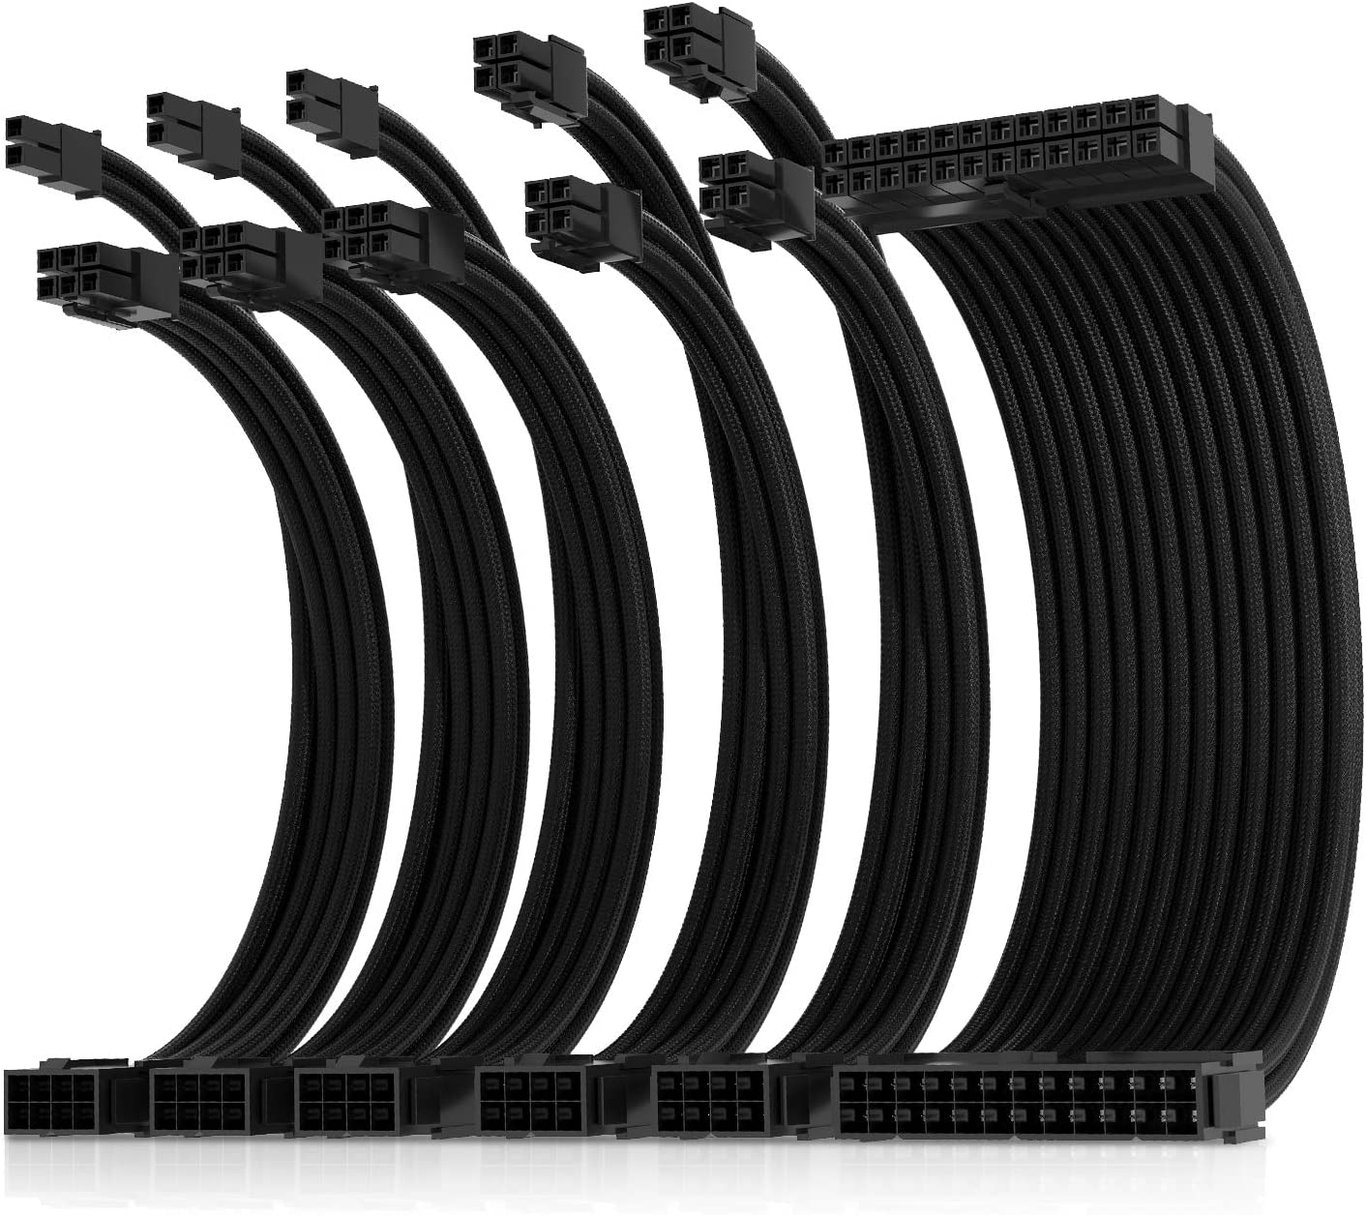 AsiaHorse Pro-6 Sleeved Extension Cable Kit - Black 黑色